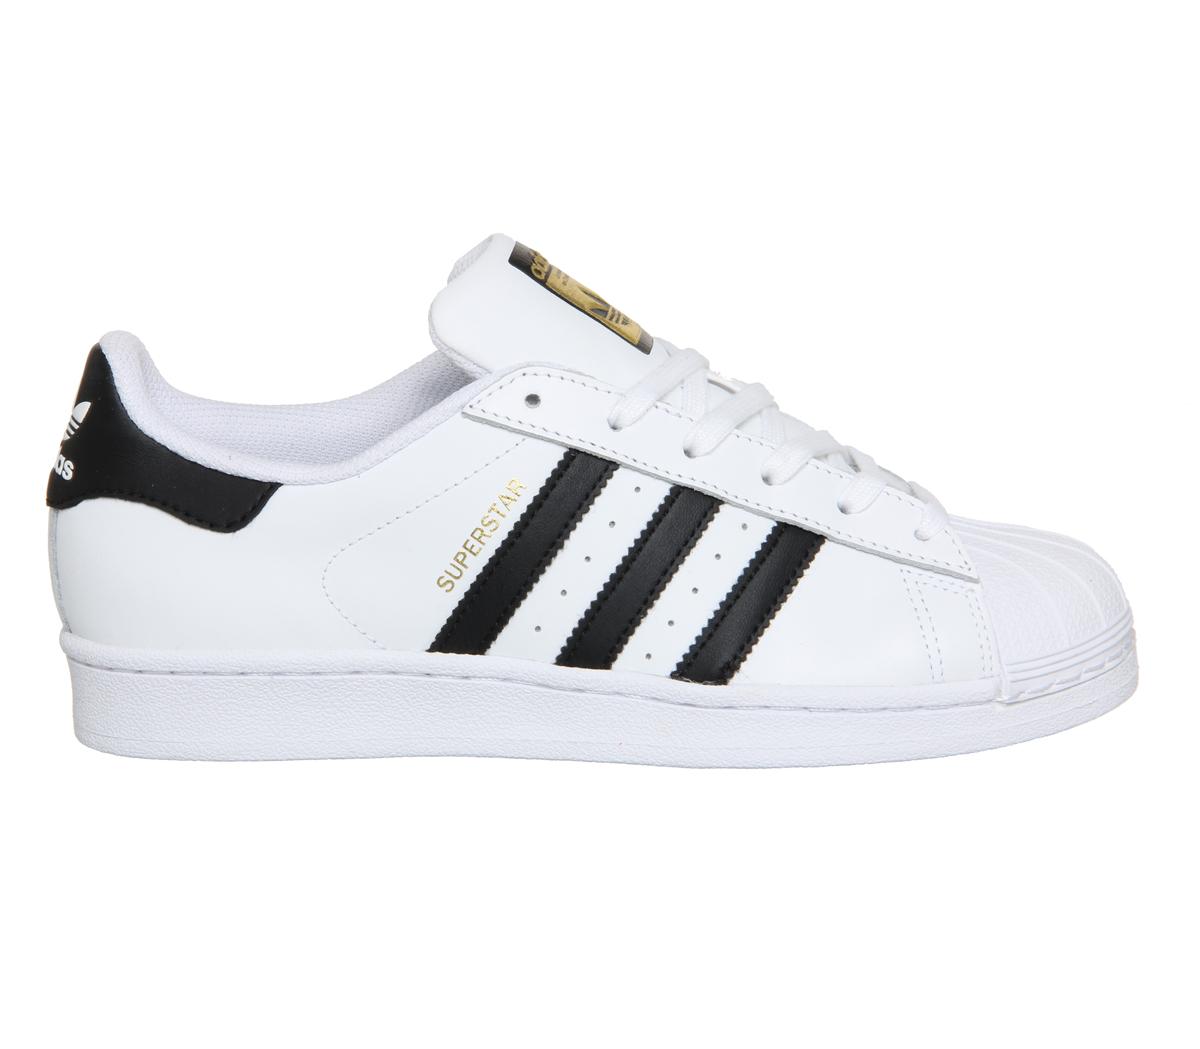 adidas Superstar White Black Foundation - Hers trainers